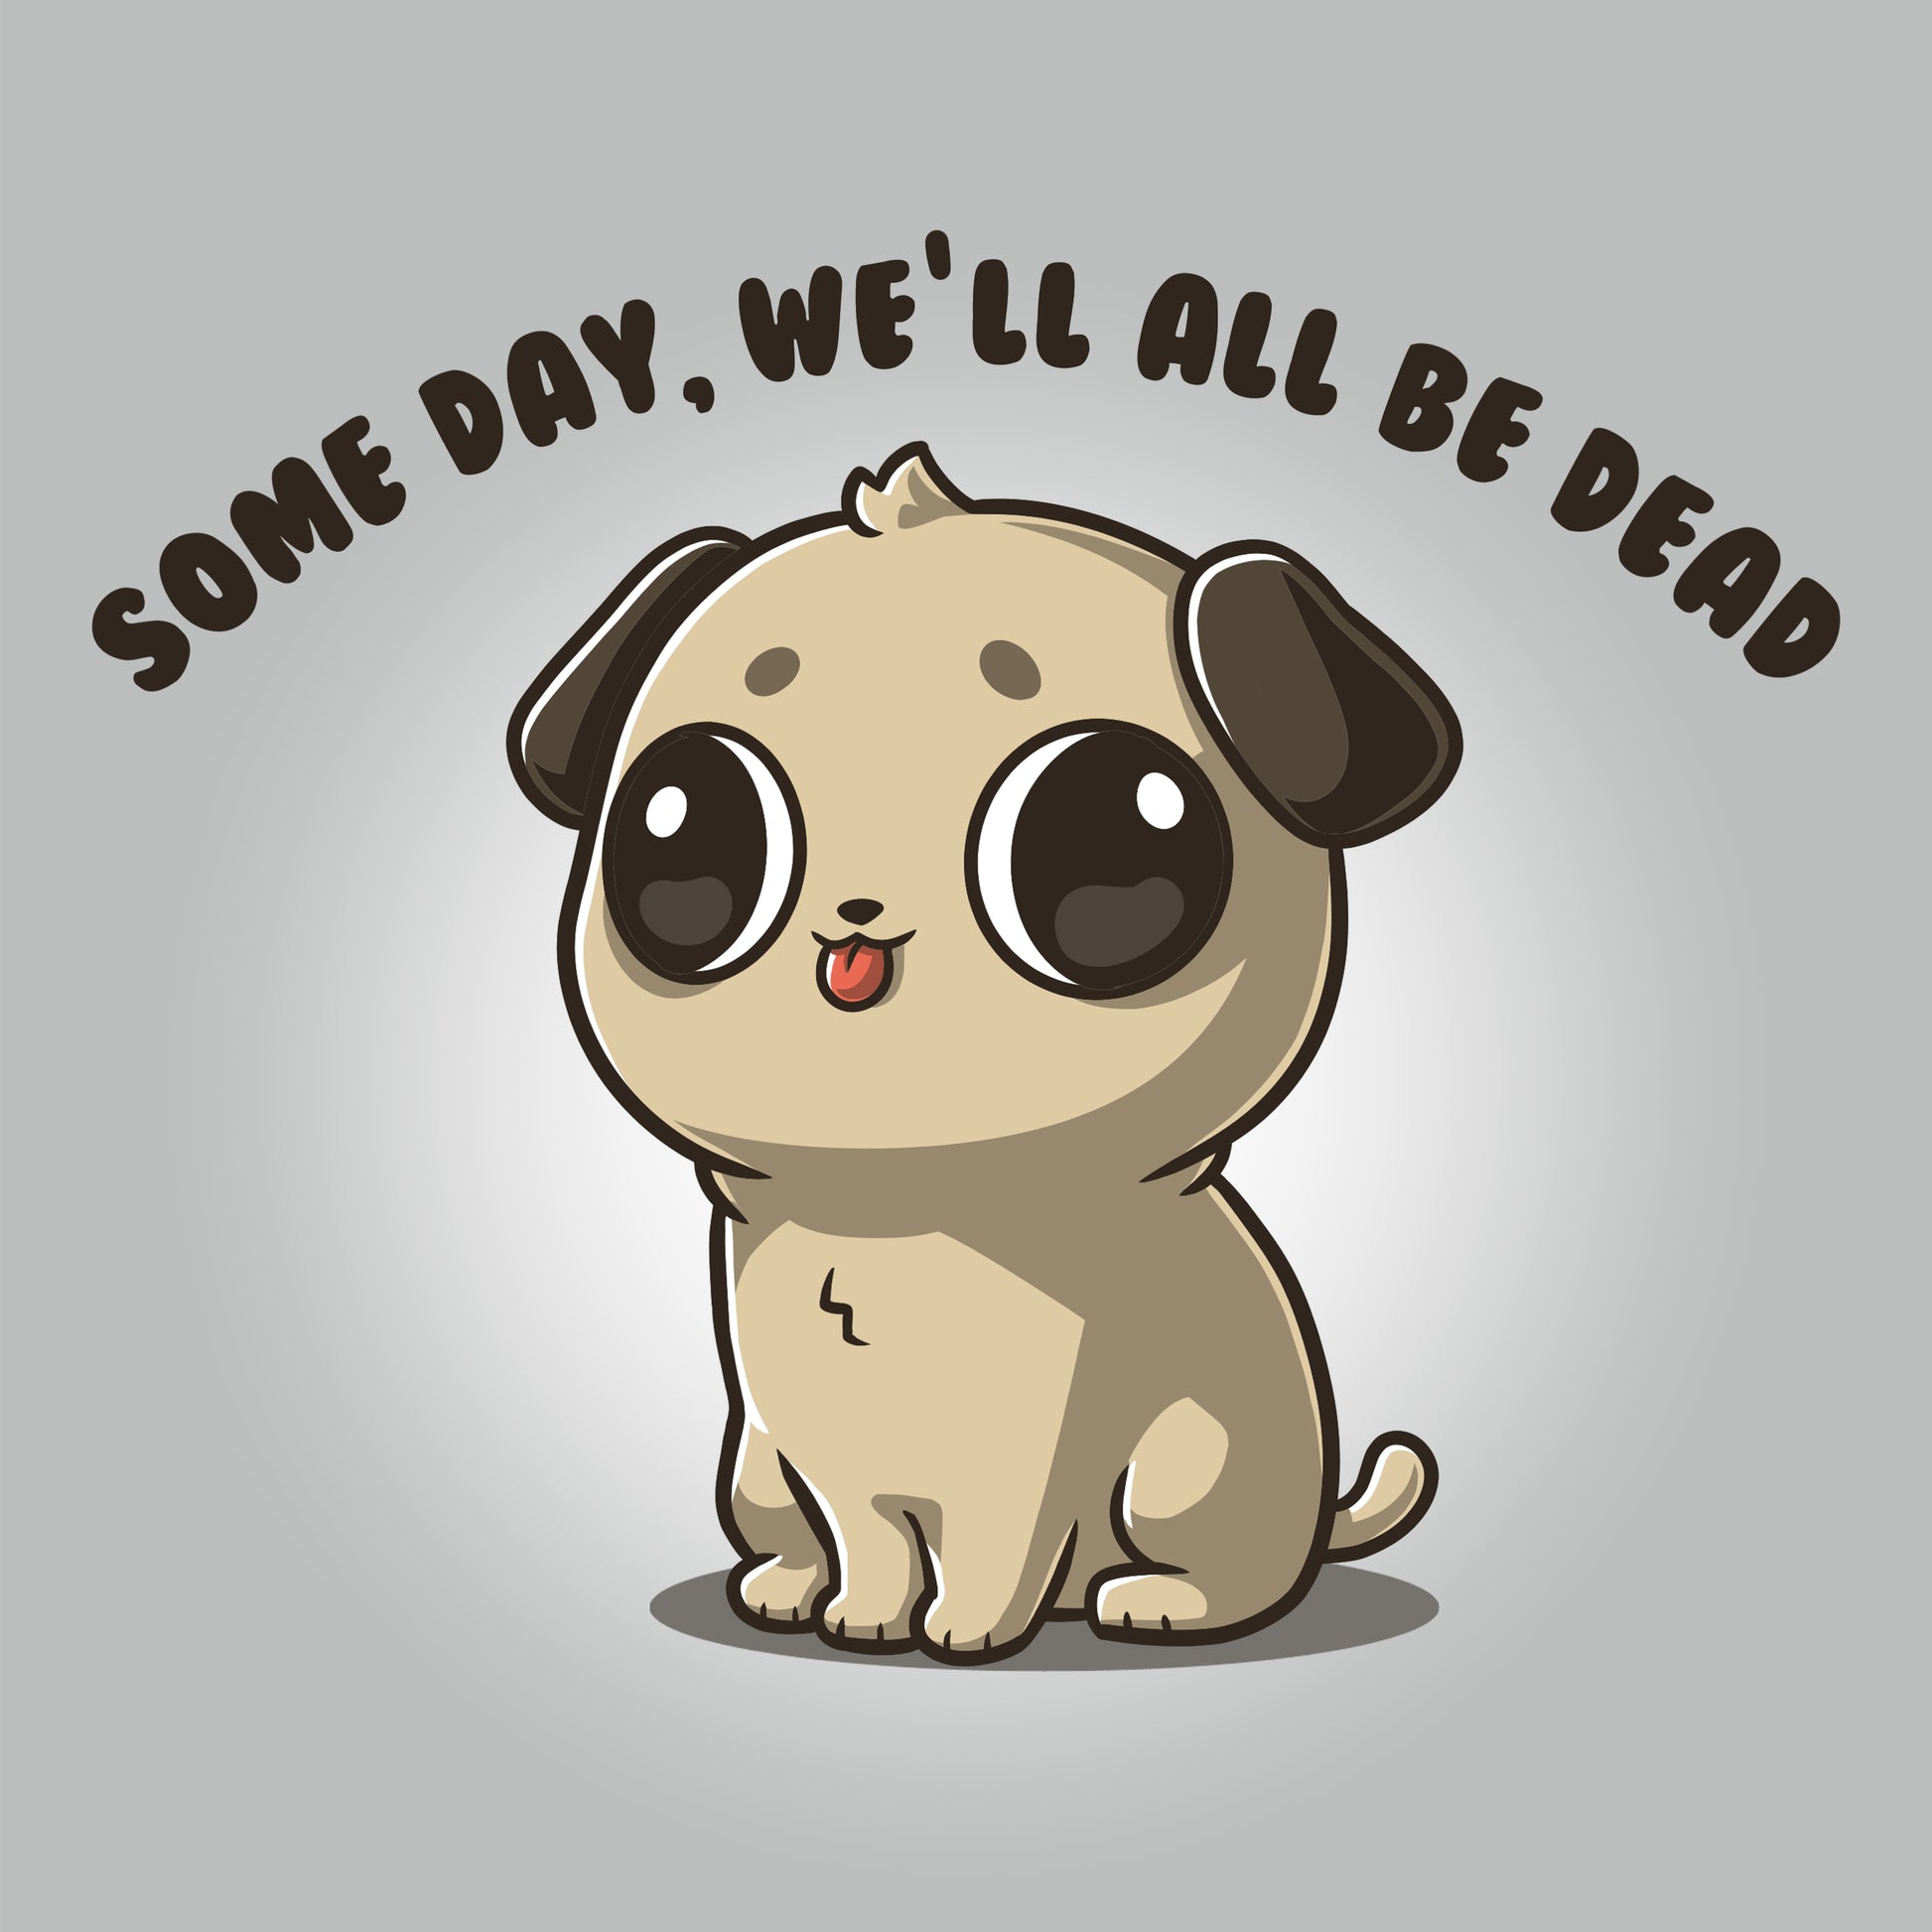 A silver Some Day, We'll All Be Dead t-shirt donned by a dead pug at a social gathering evokes existential dread. (Brand: TeeTurtle)